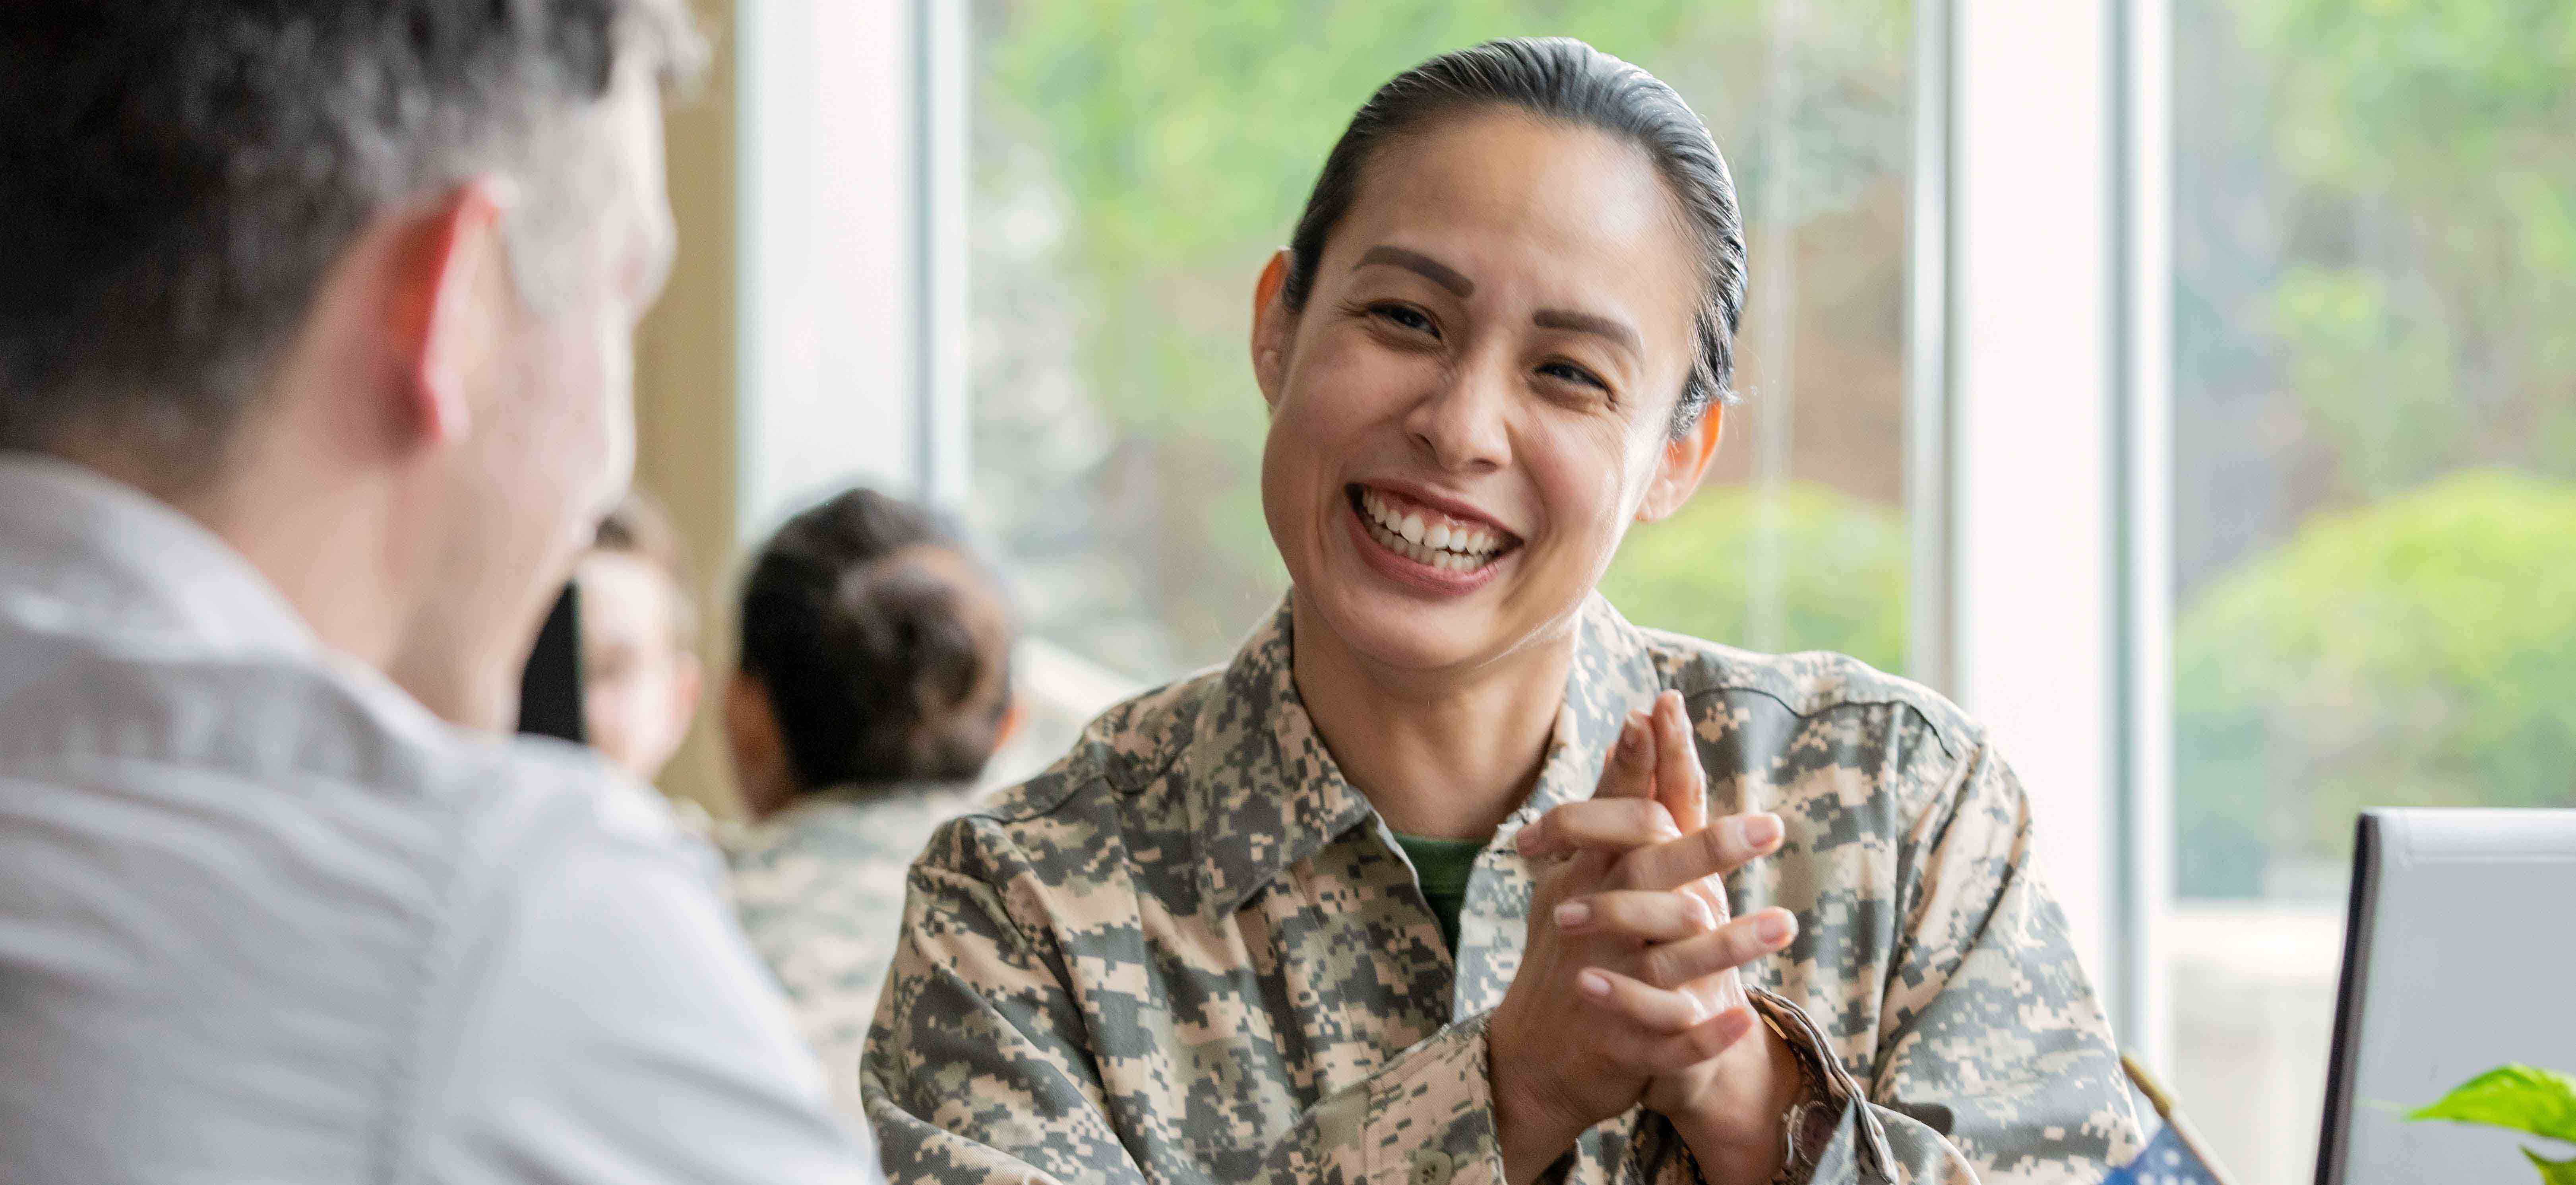 Female veteran in in uniform sitting at a table smiling